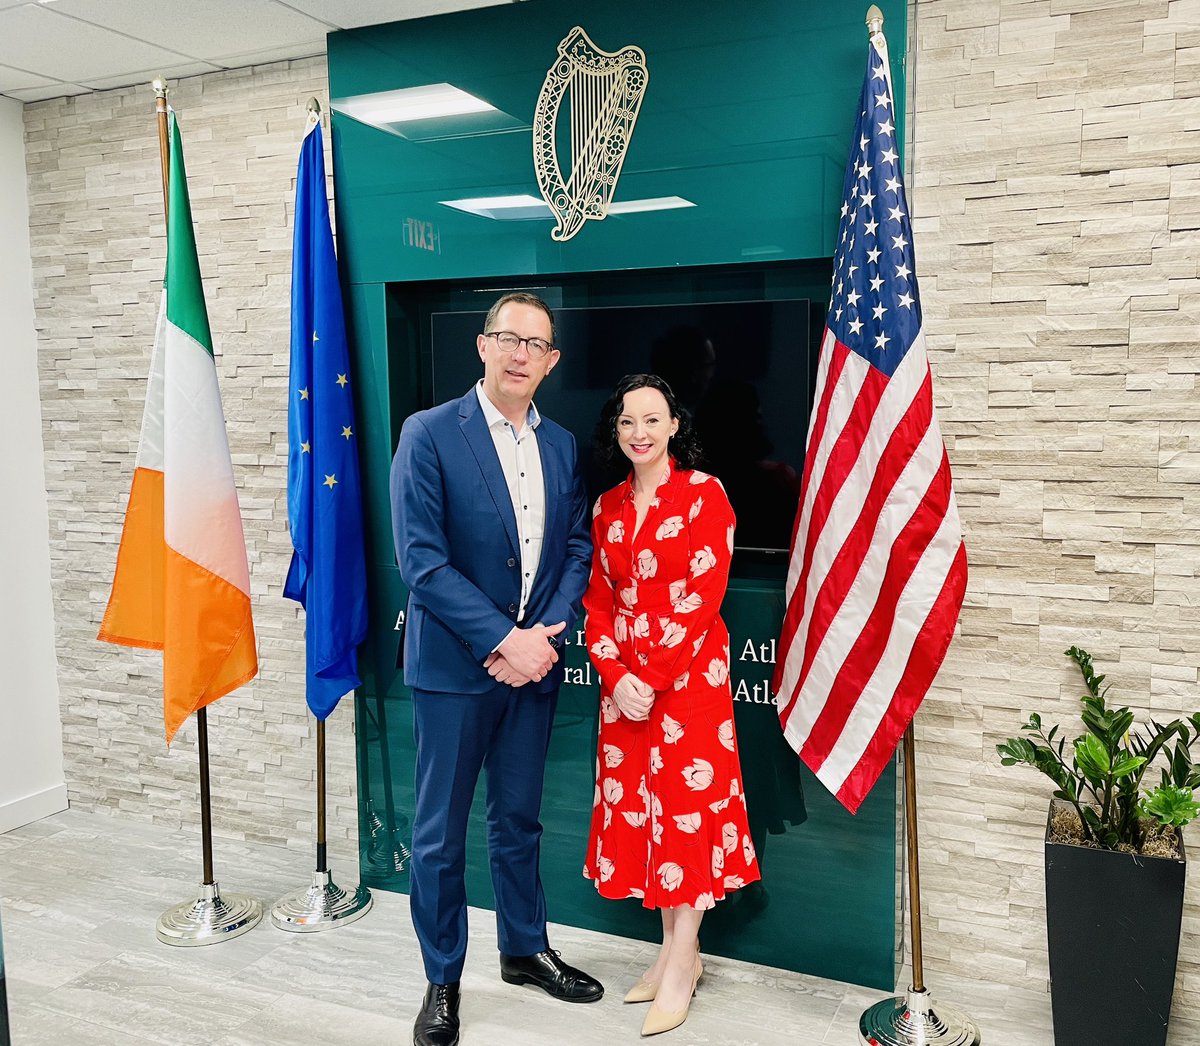 It was a pleasure to sit down with Conor Healy, CEO of @CorkChamber, over a cup of Barry’s tea to discuss the opportunity for Cork business in the US Southeast. Fáilte agus fiche! @GatewayToEurope